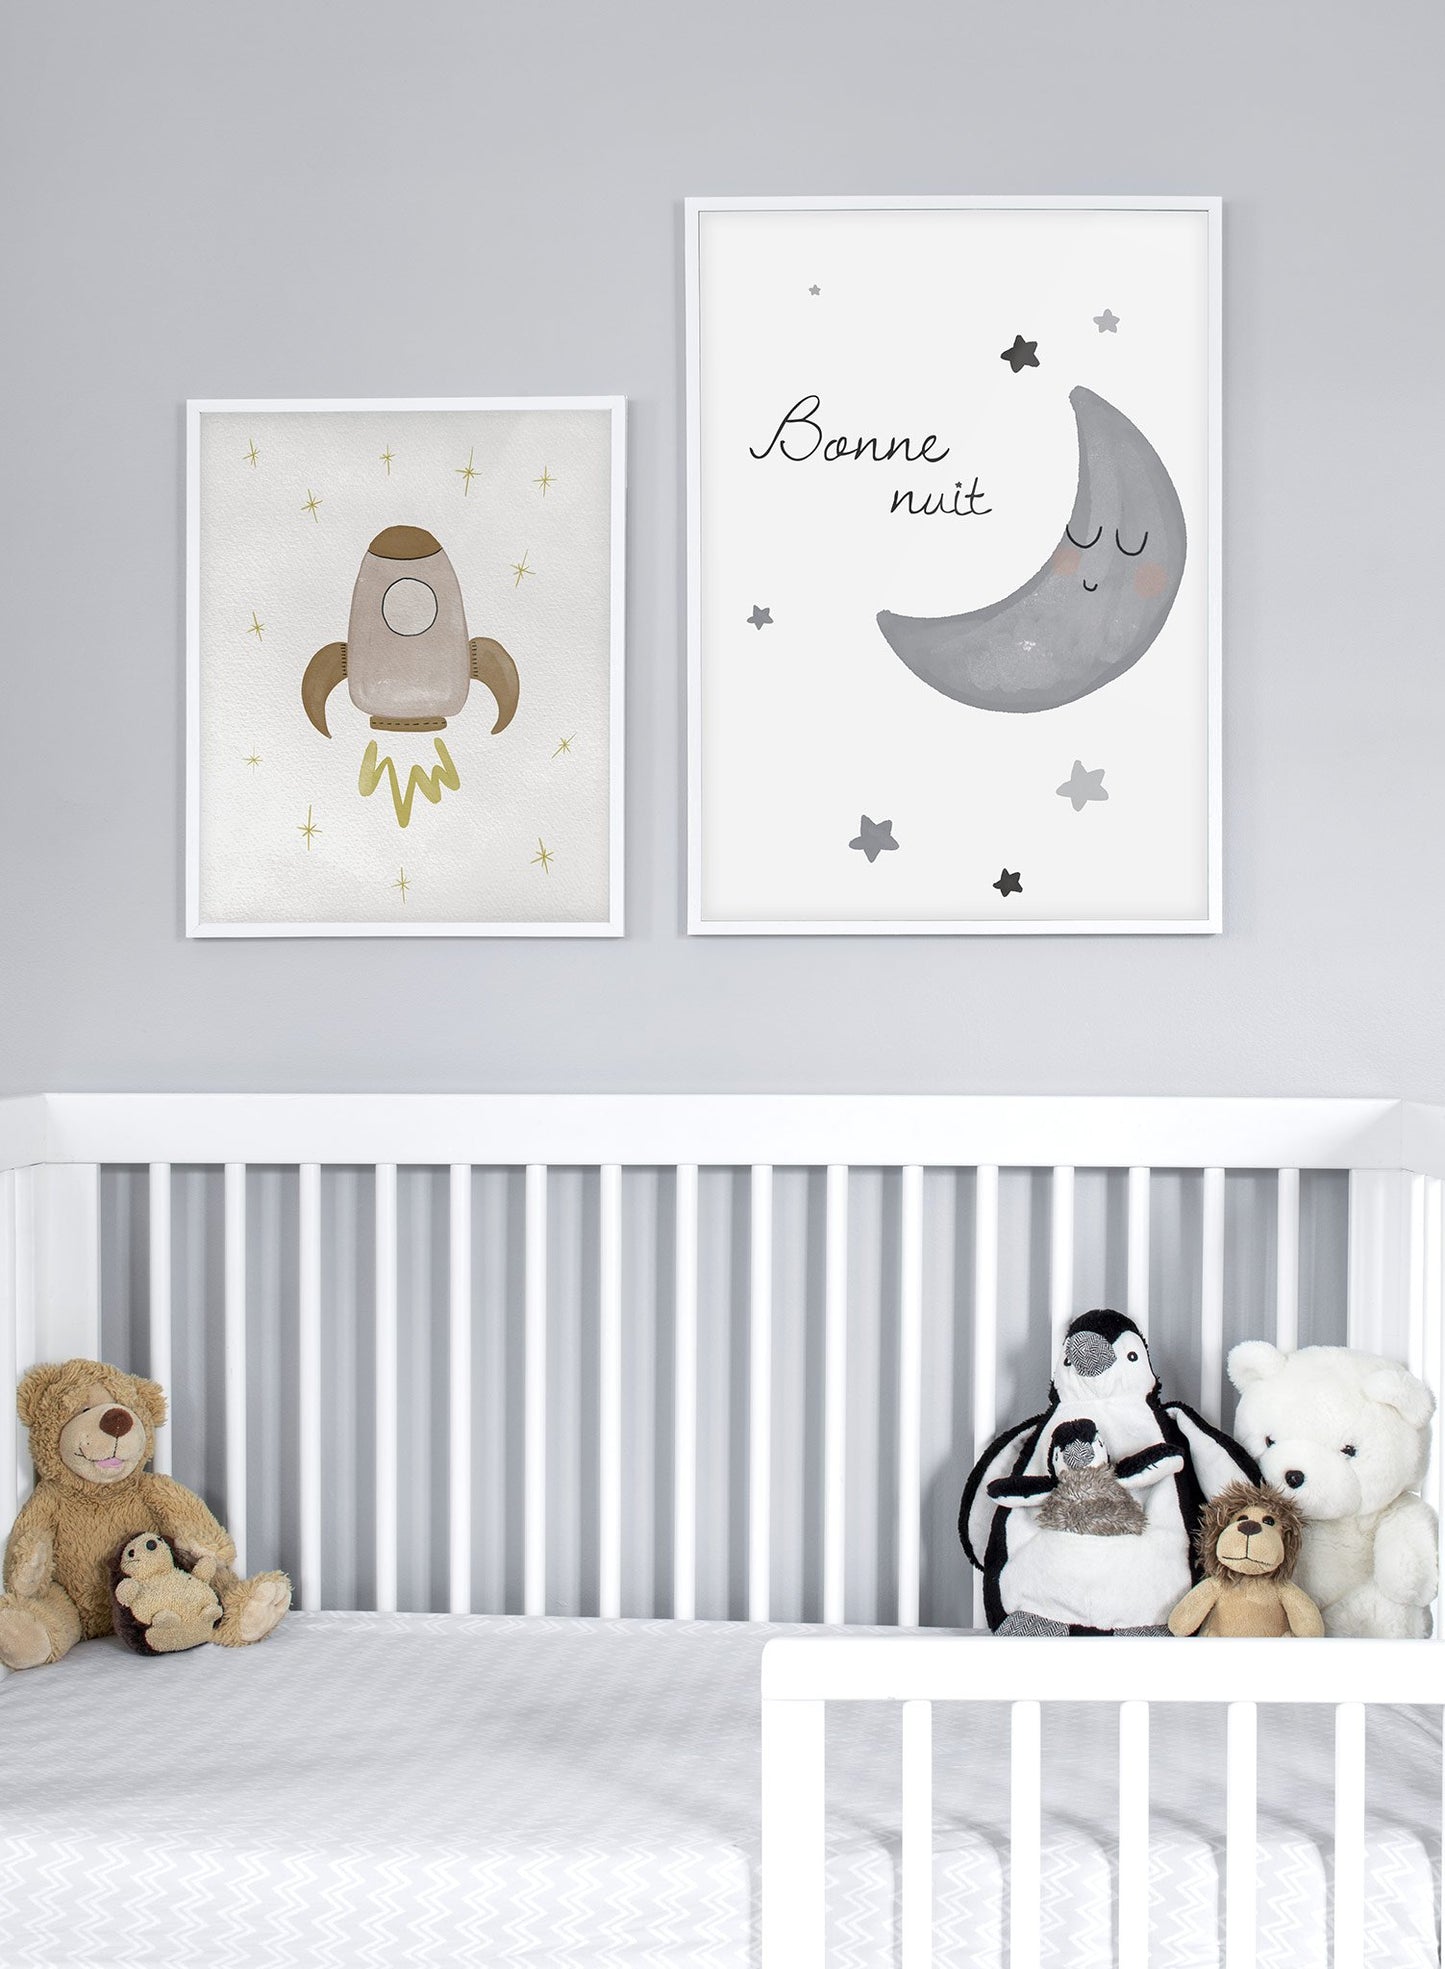 Kids nursery poster by Opposite Wall with watercolour moon and bonne nuit quote - Lifestyle Duo - Baby Nursery